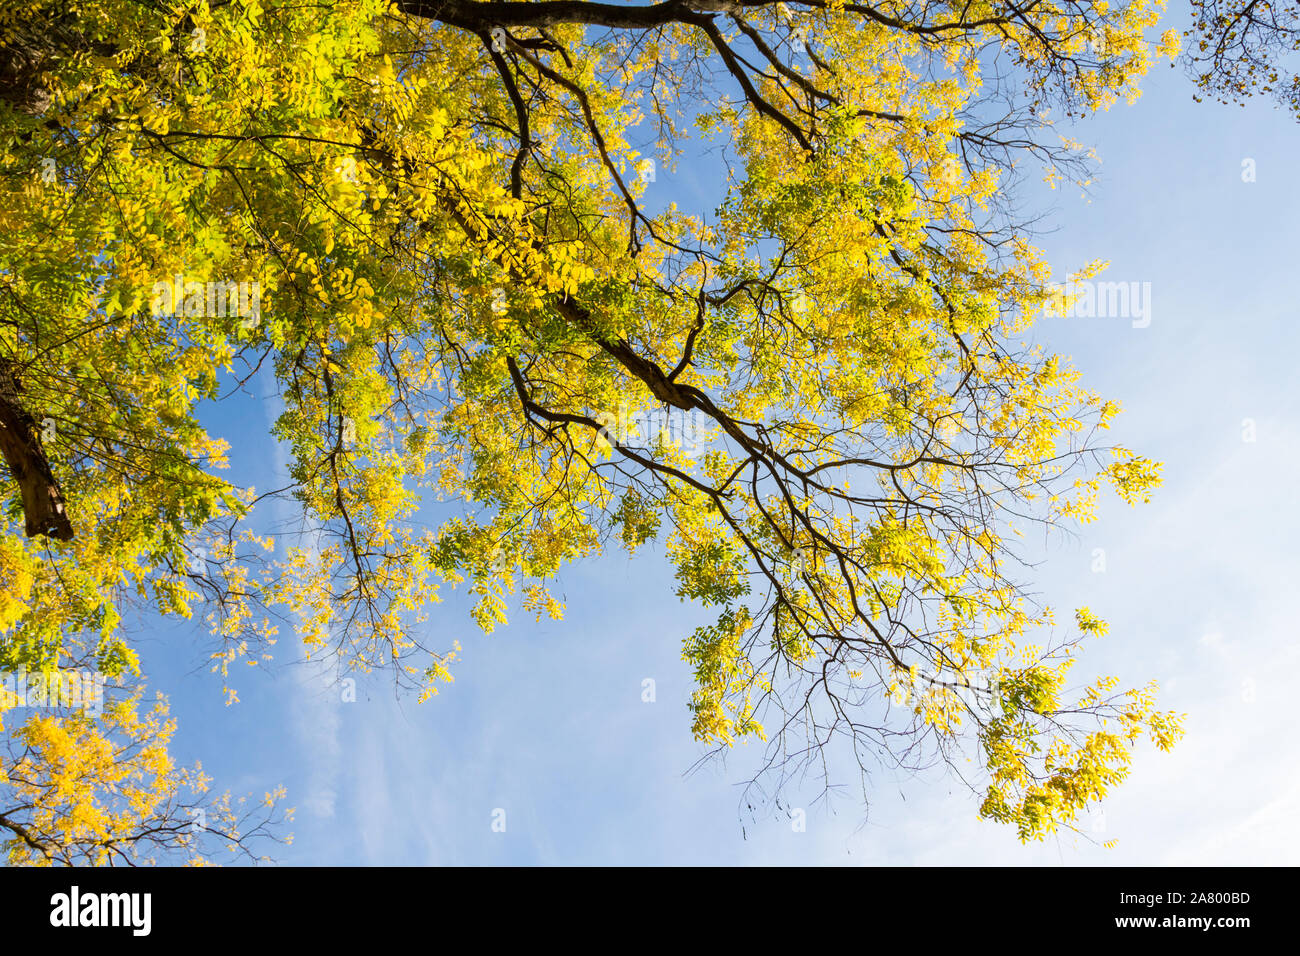 Japanese pagoda tree Styphnolobium japonicum Sophora japonica leaves on branches low angle view from below in autumn, Sopron, Hungary Stock Photo